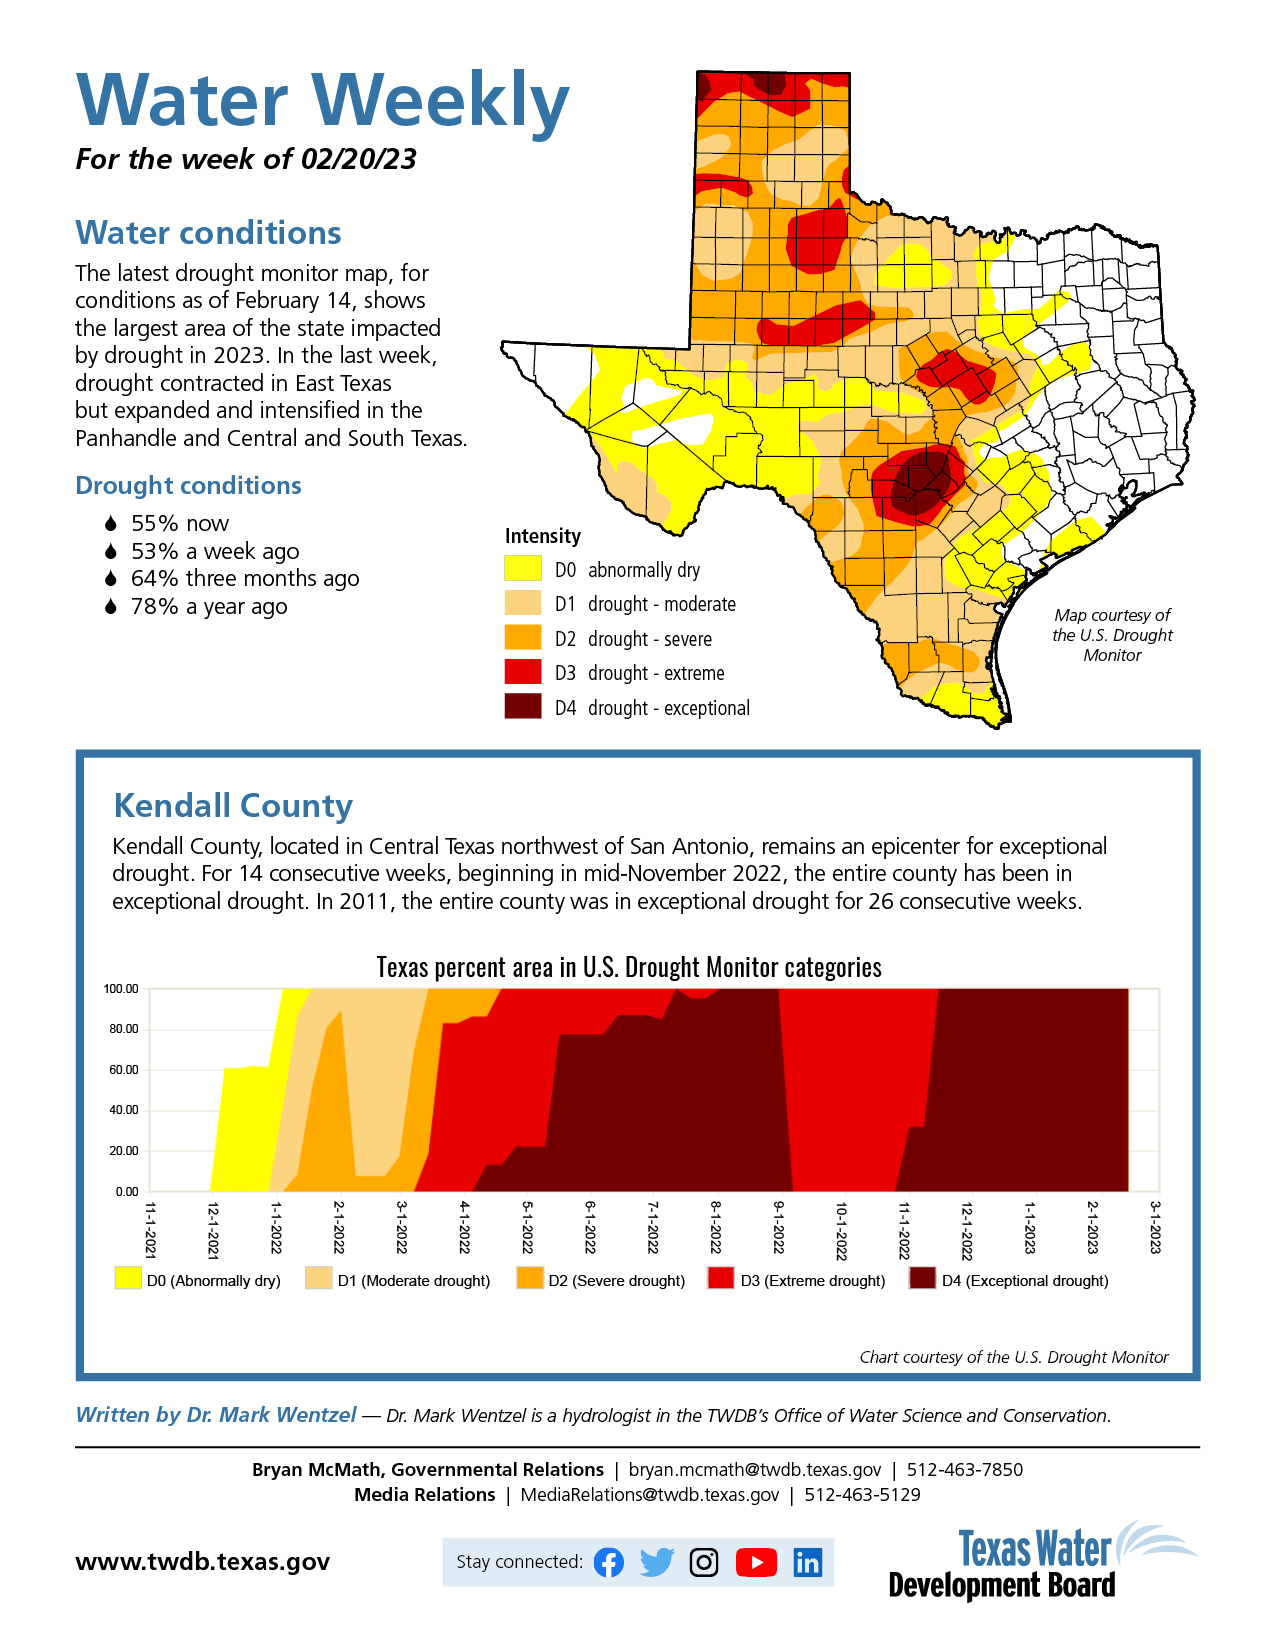 Texas Water Development Board on Twitter "The latest drought monitor